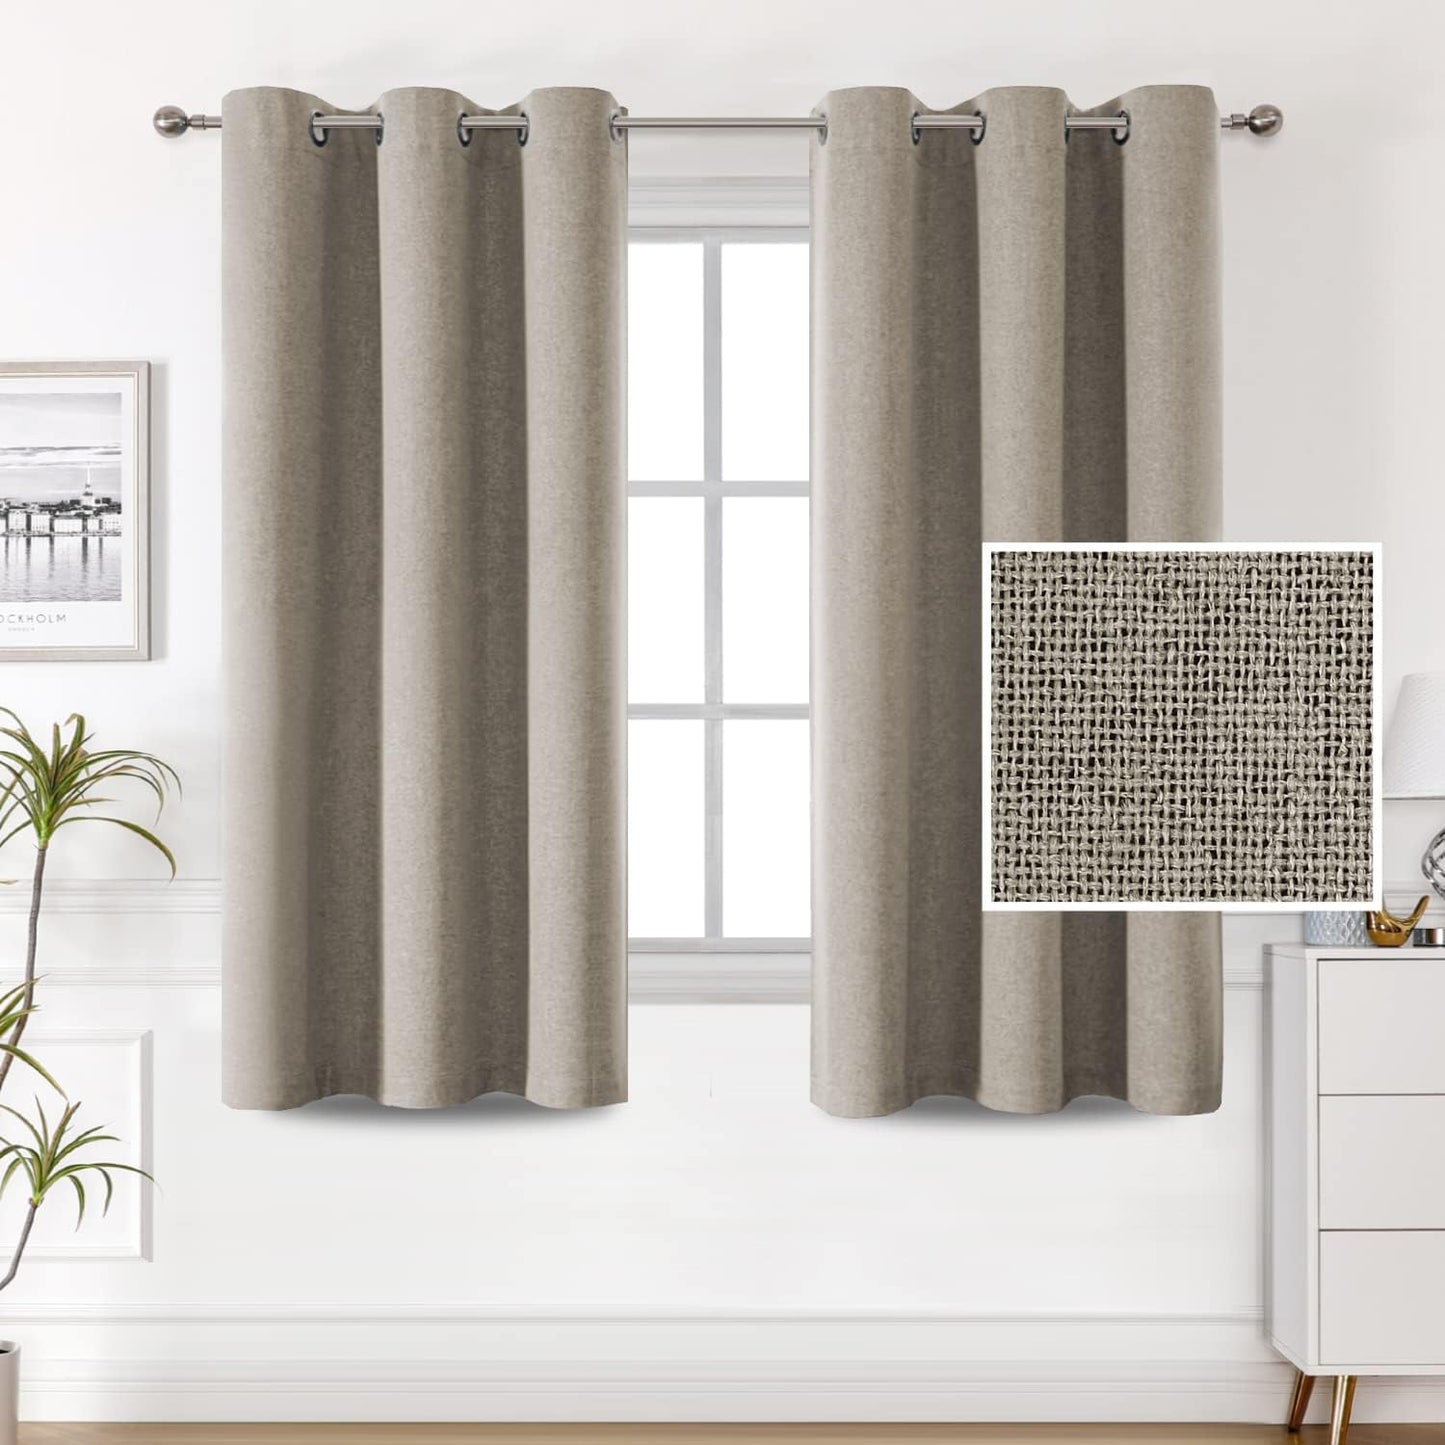 H.VERSAILTEX 100% Blackout Linen Look Curtains Thermal Insulated Curtains for Living Room Textured Burlap Drapes for Bedroom Grommet Linen Noise Blocking Curtains 42 X 84 Inch, 2 Panels - Off-White  H.VERSAILTEX Taupe 42"W X 63"L 